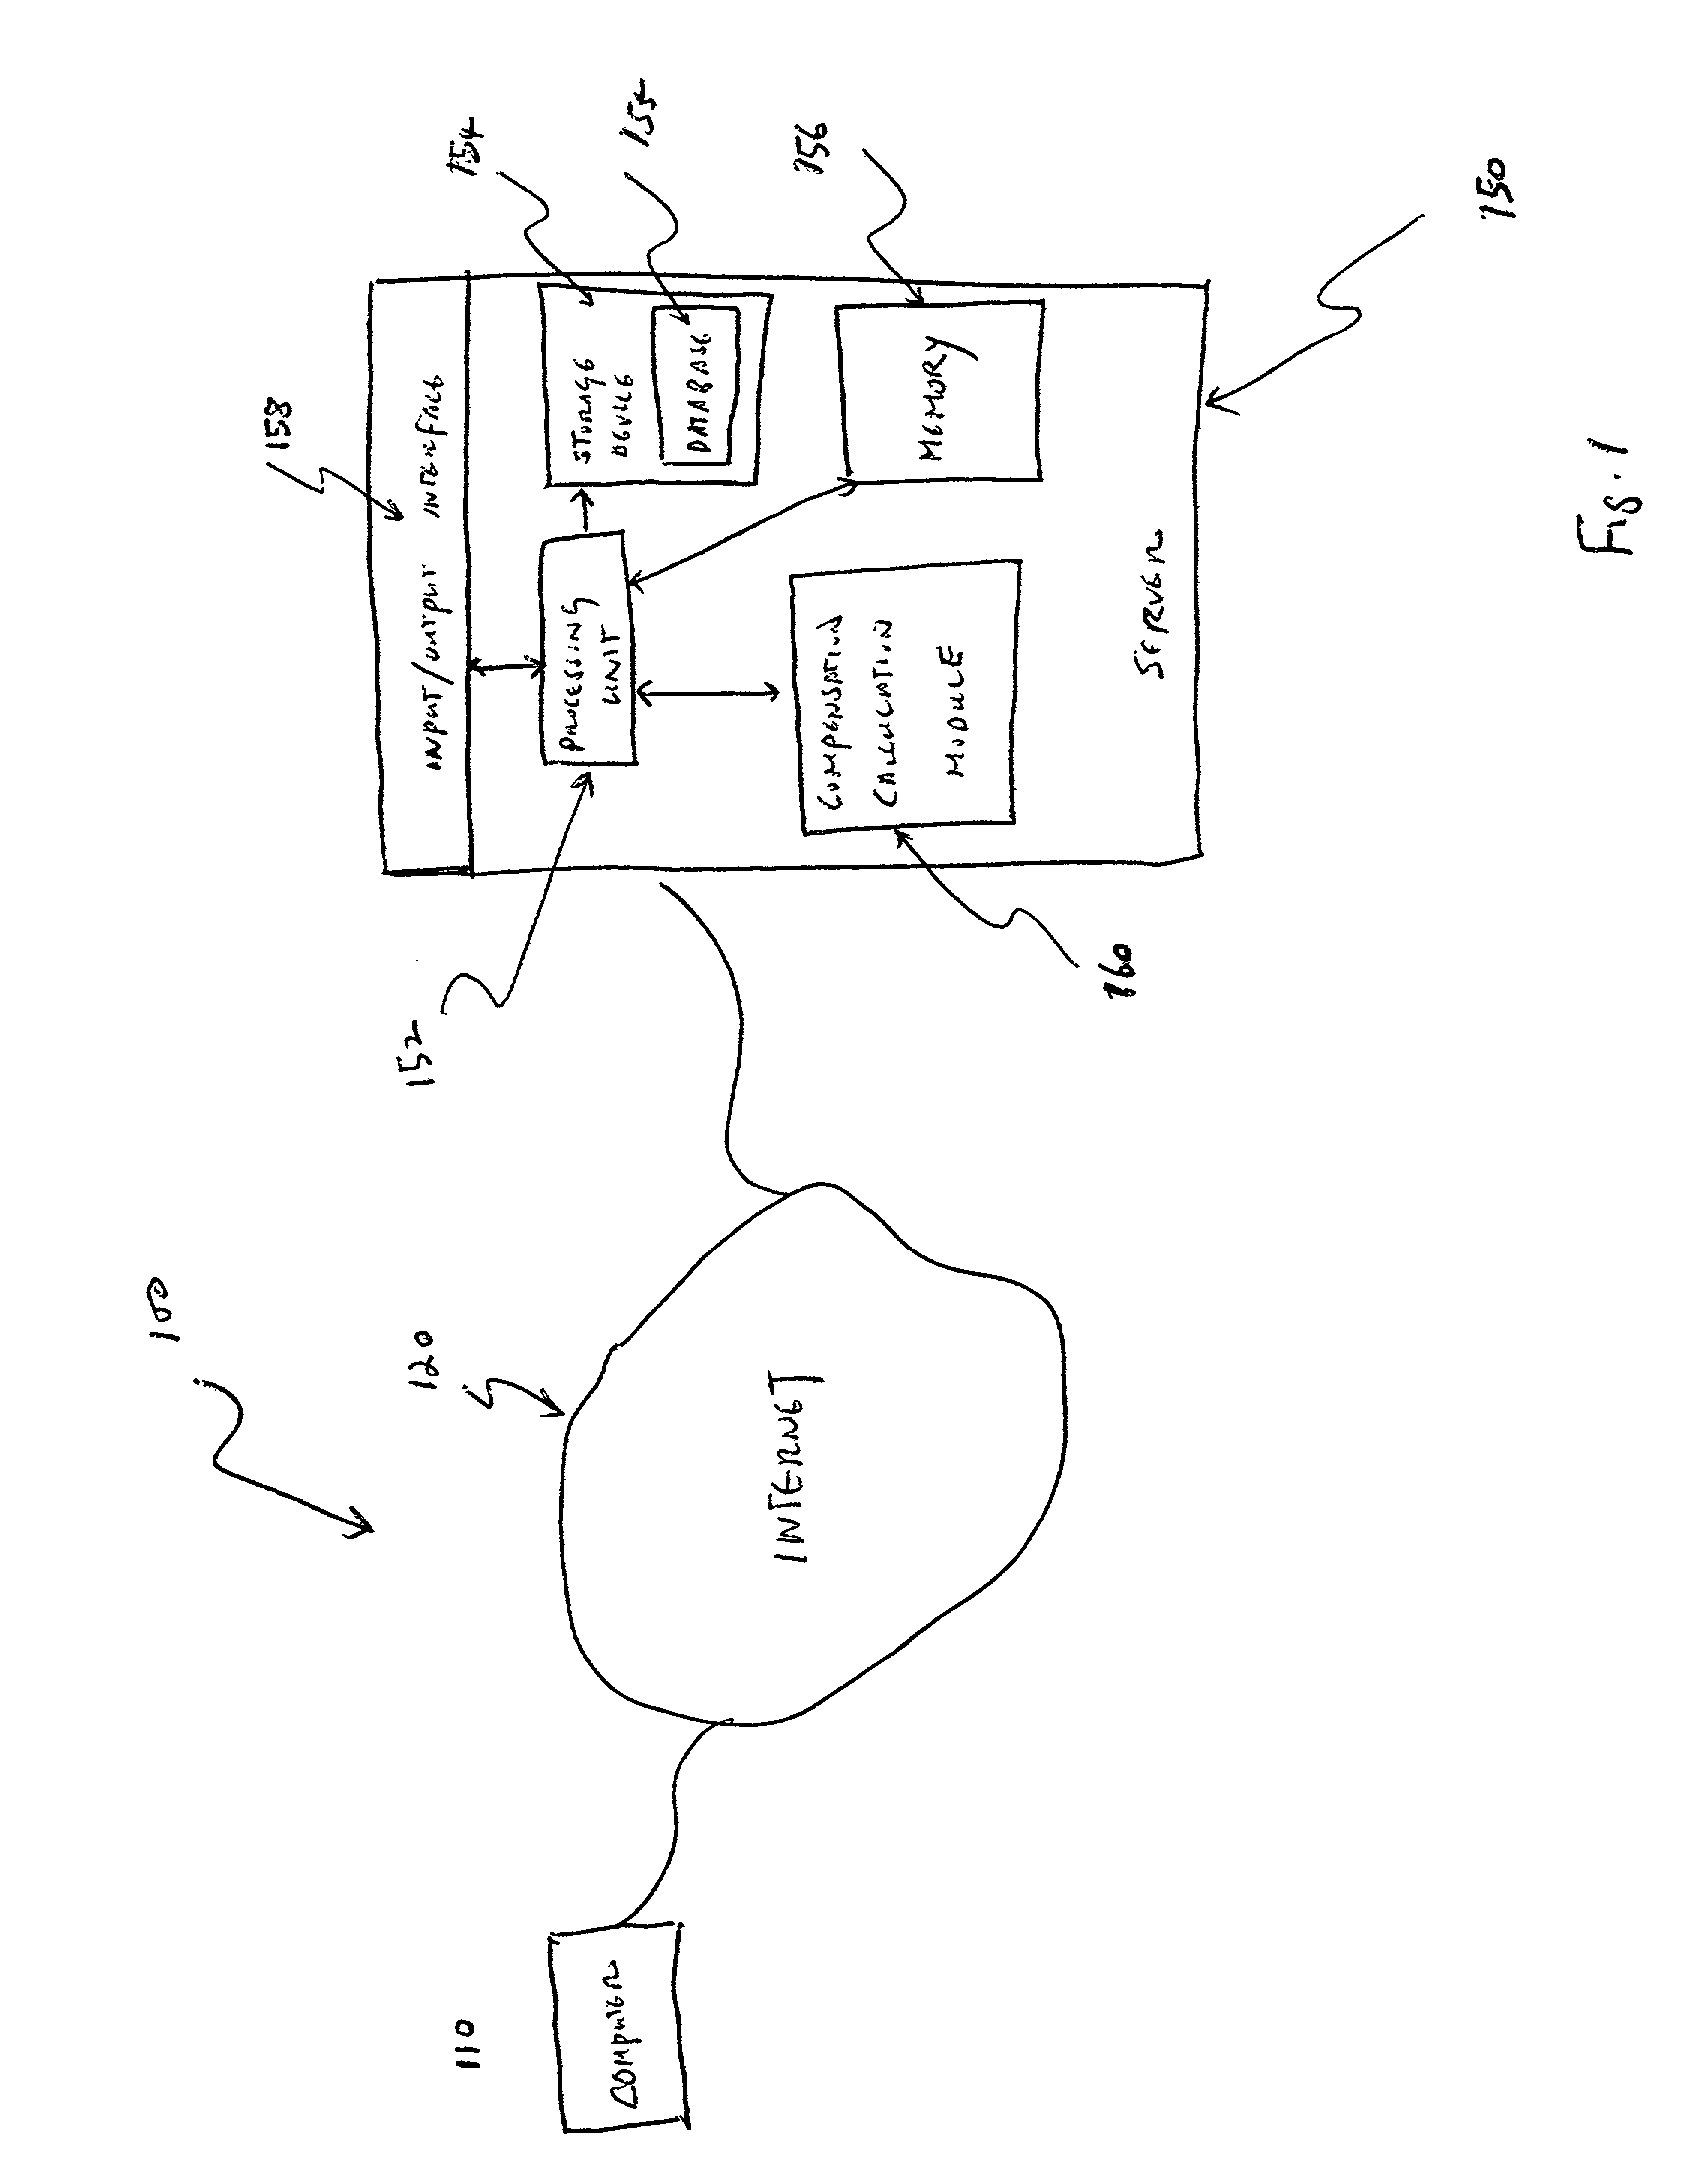 Apparatus and method for providing compensation information